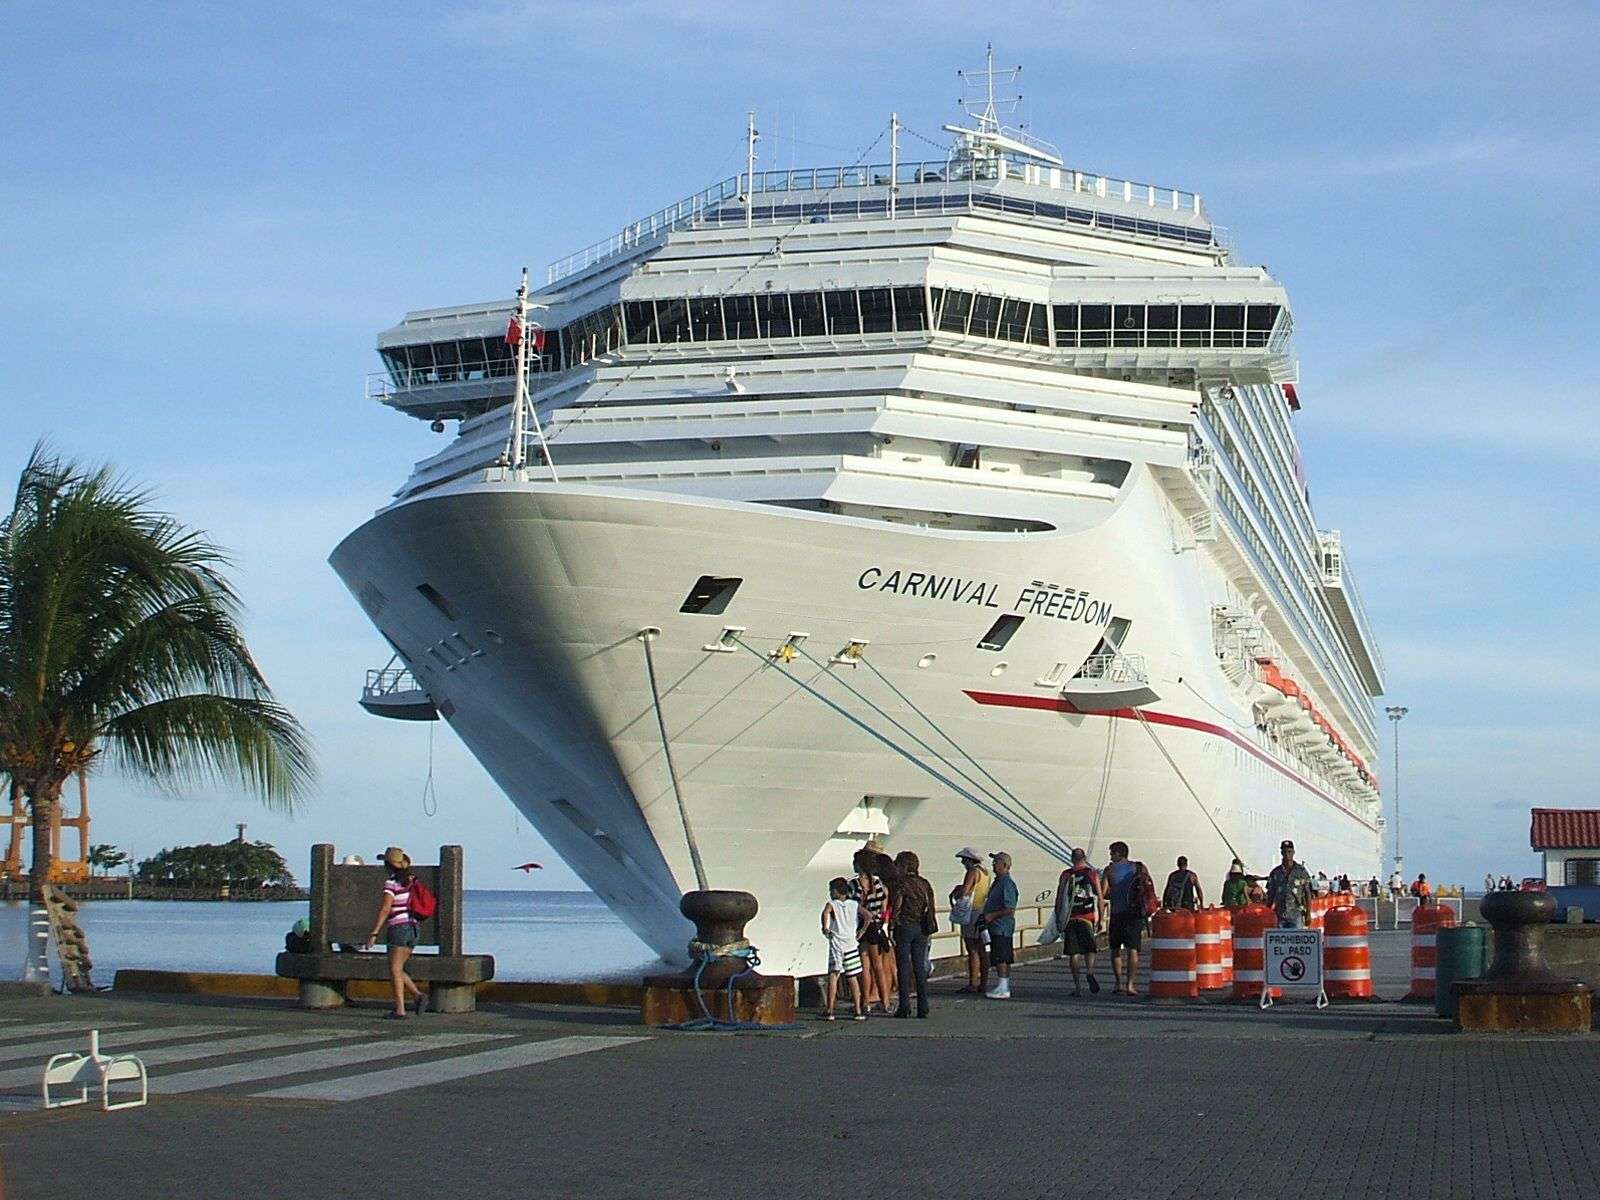 Costa Rica on the Carnival Freedom